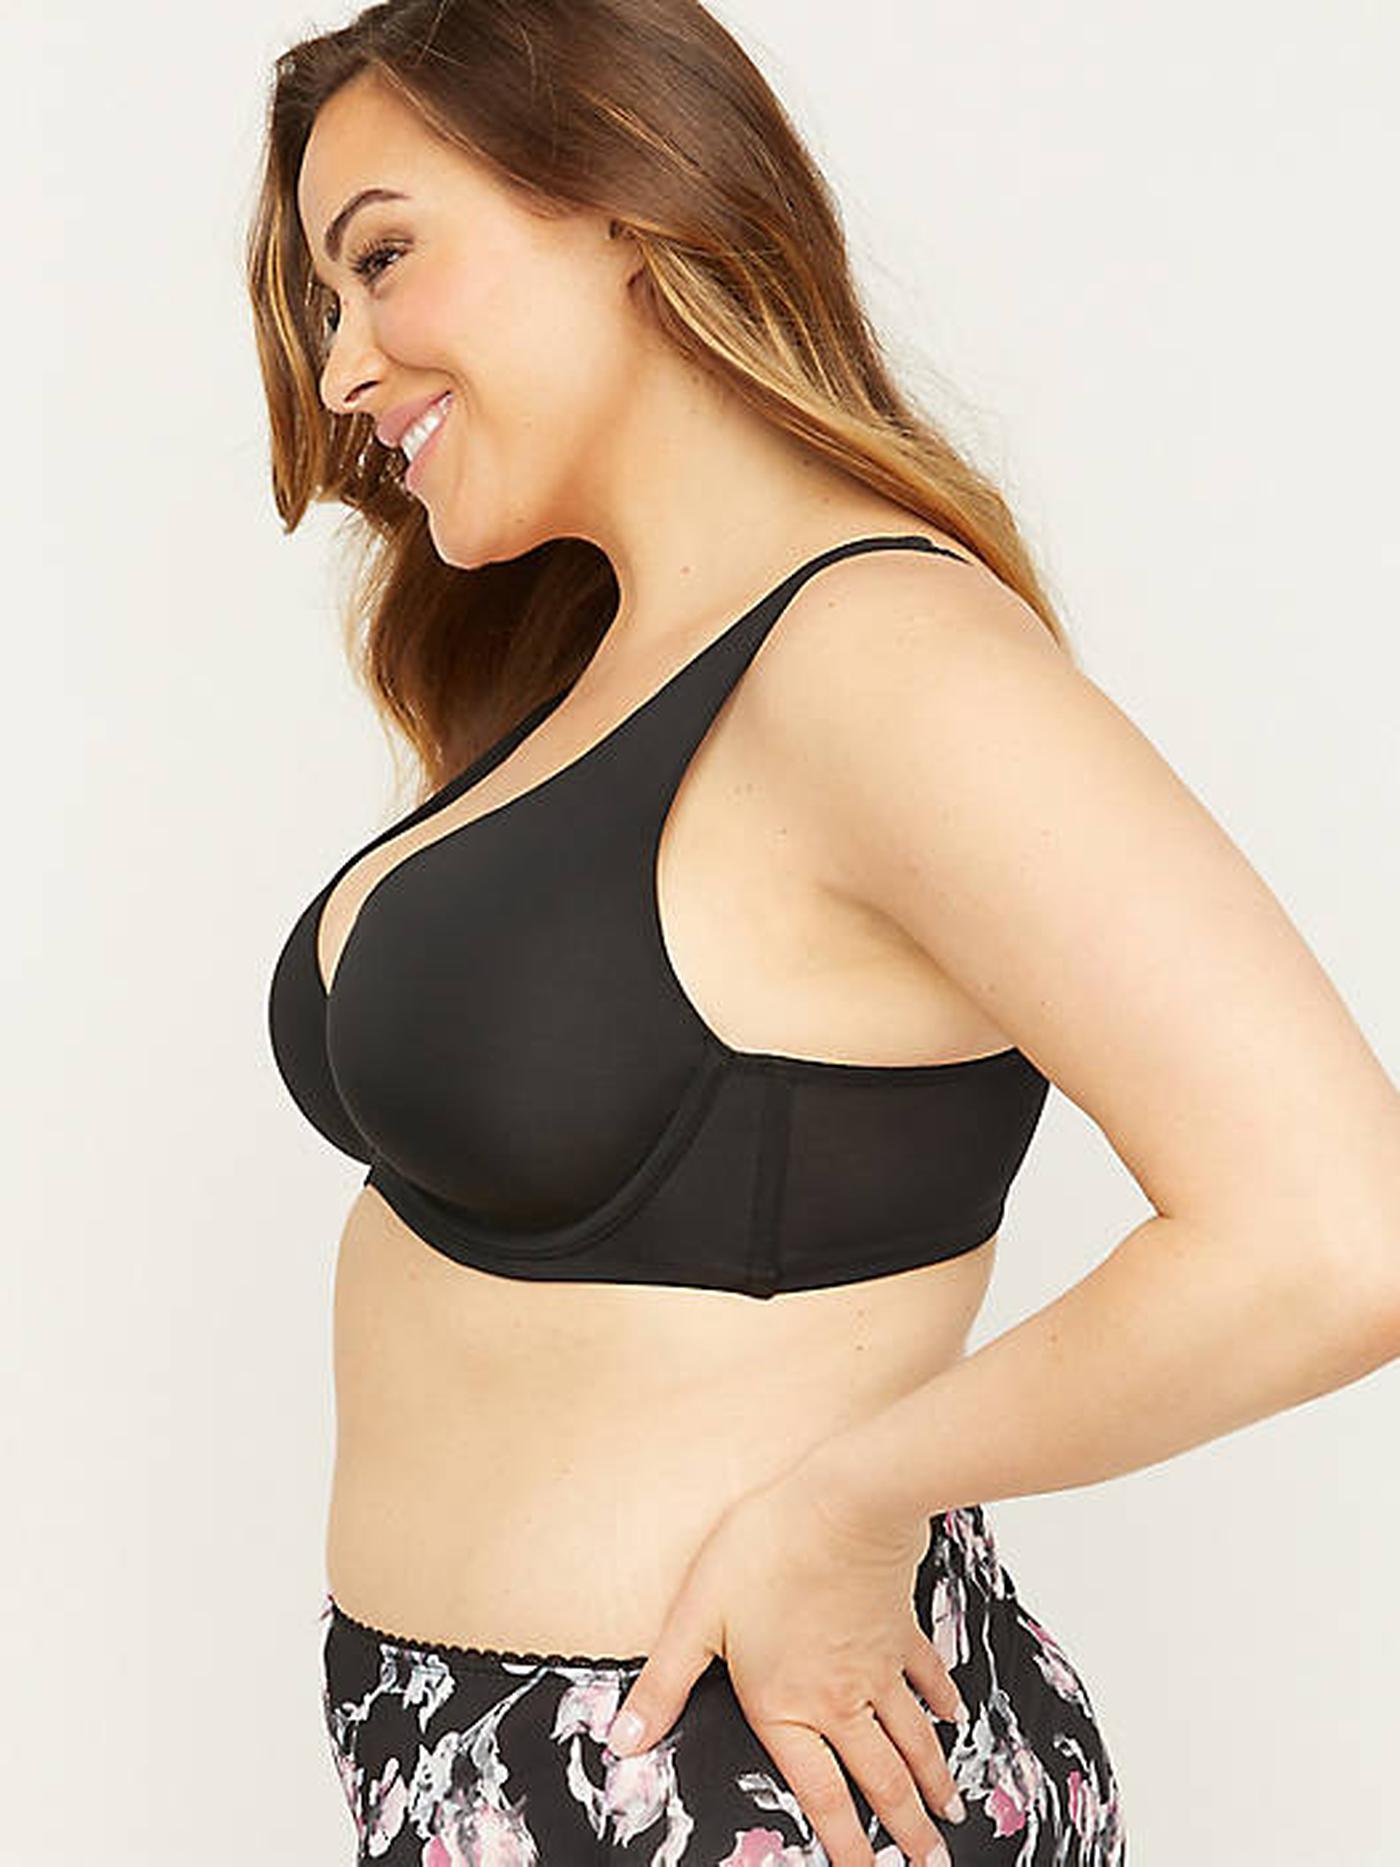 Large Plus Size Bras For Women , Thin bras, Breast Gathering